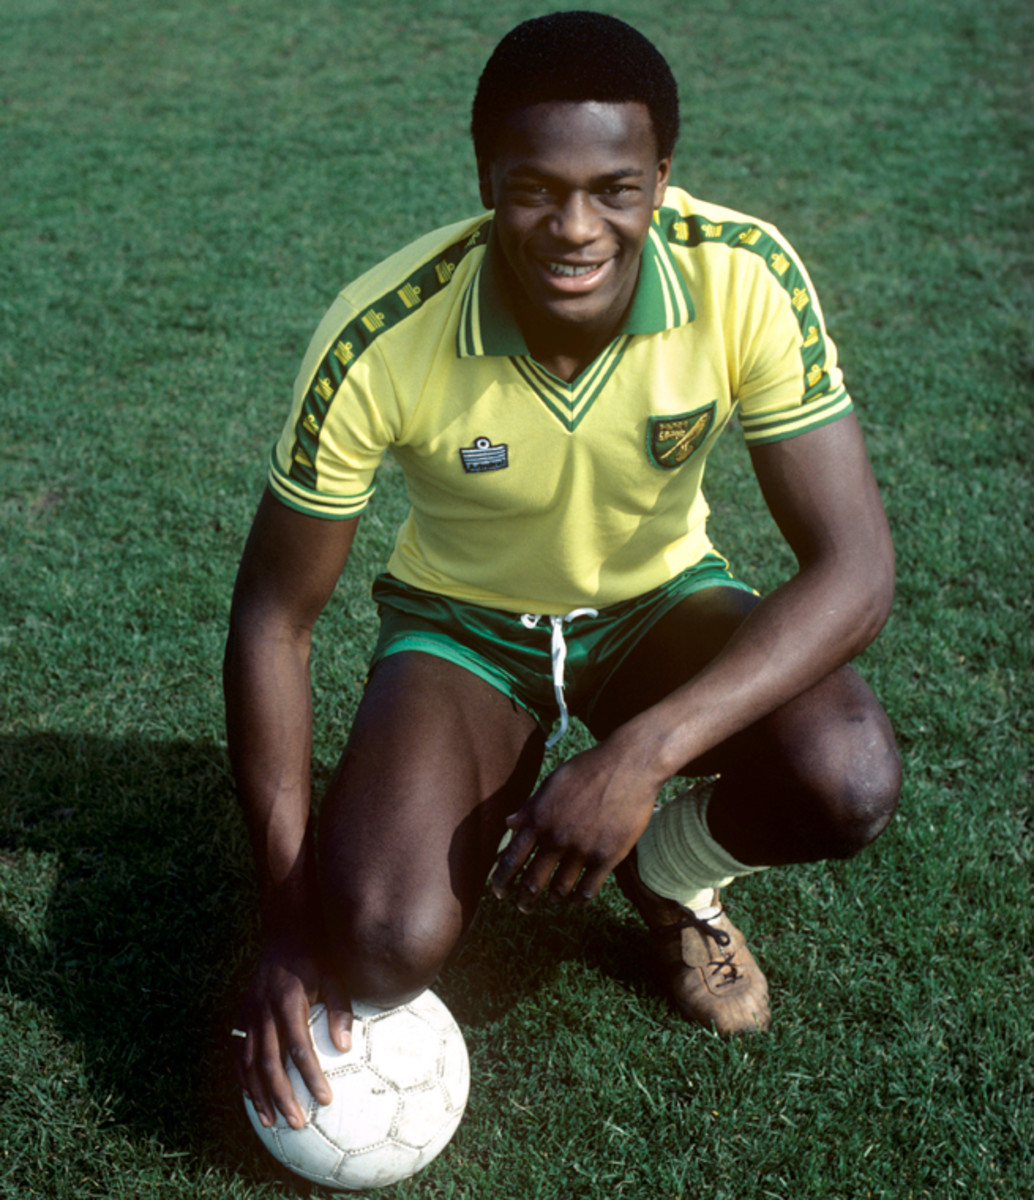 Justin Fashanu was a star scorer at Norwich City, earning a lucrative transfer to Nottingham Forest.